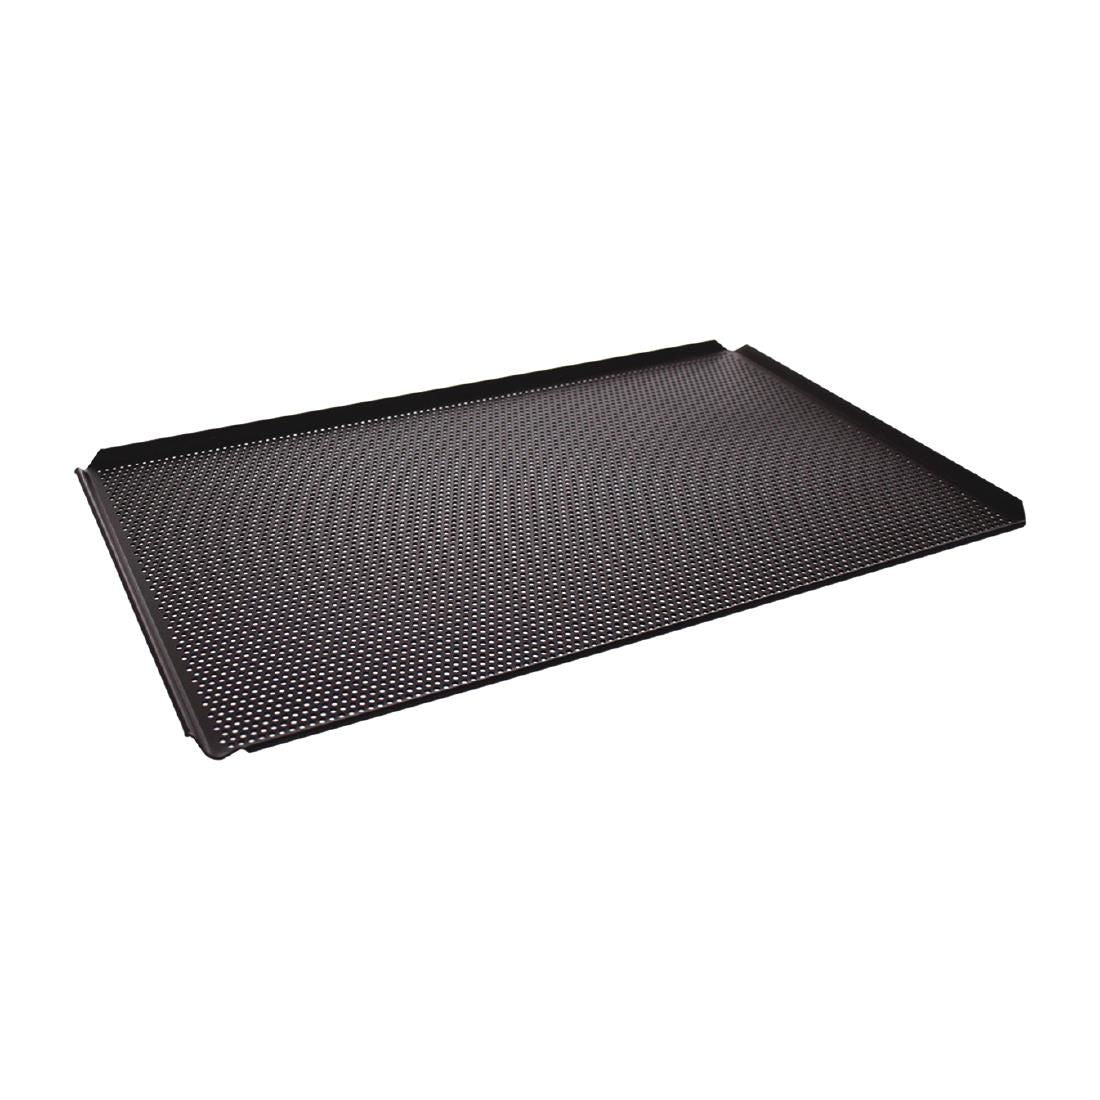 DW285 Schneider Tyneck Non-Stick Perforated Baking Tray 600 x 400mm